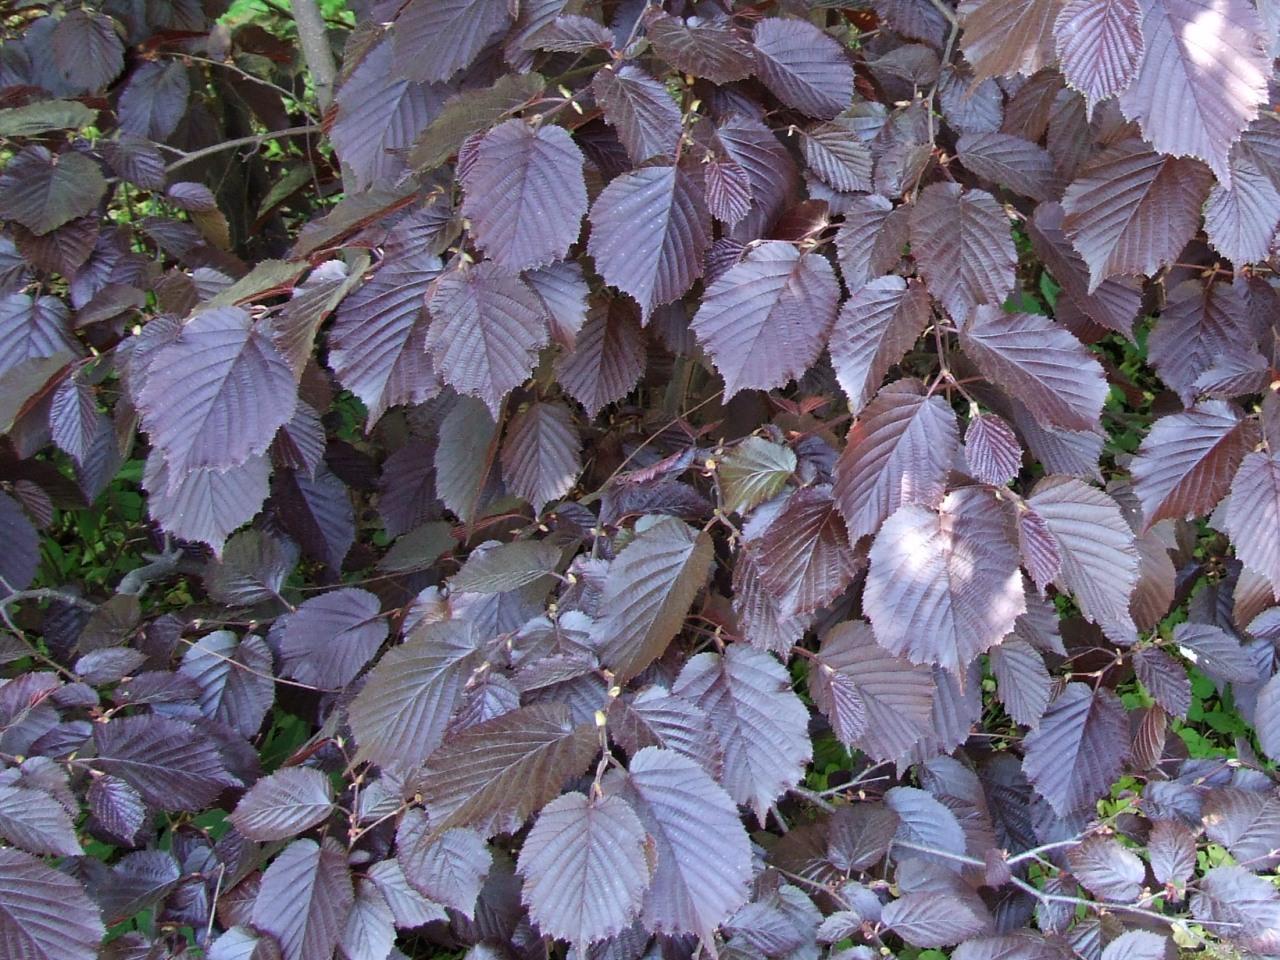 gray-pink leaves with gray-pink stems